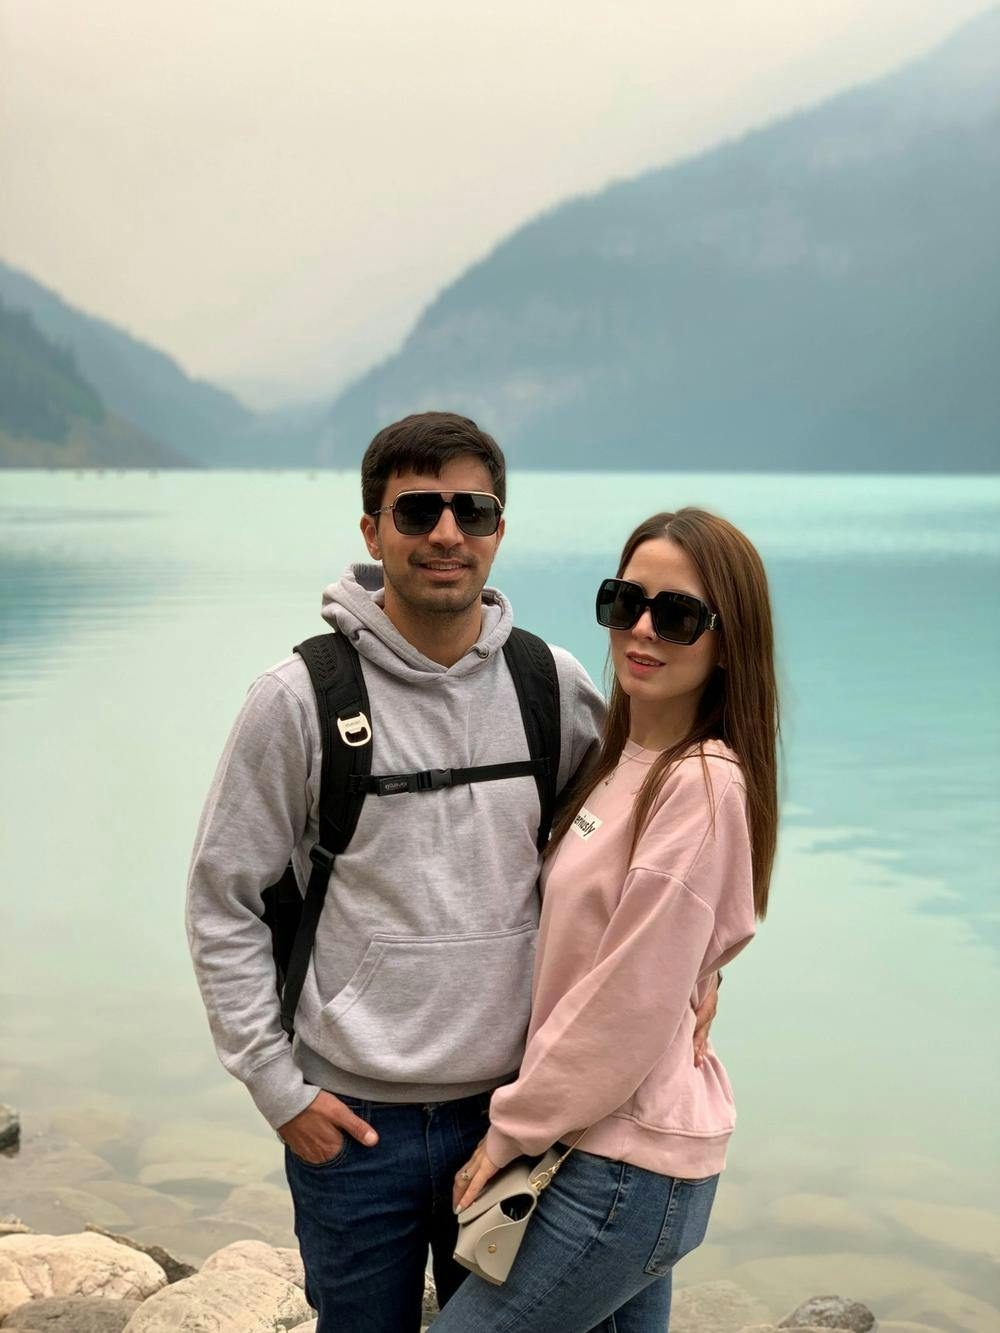 Baqar and his partner wearing sunglasses standing in front of a lake and mountains